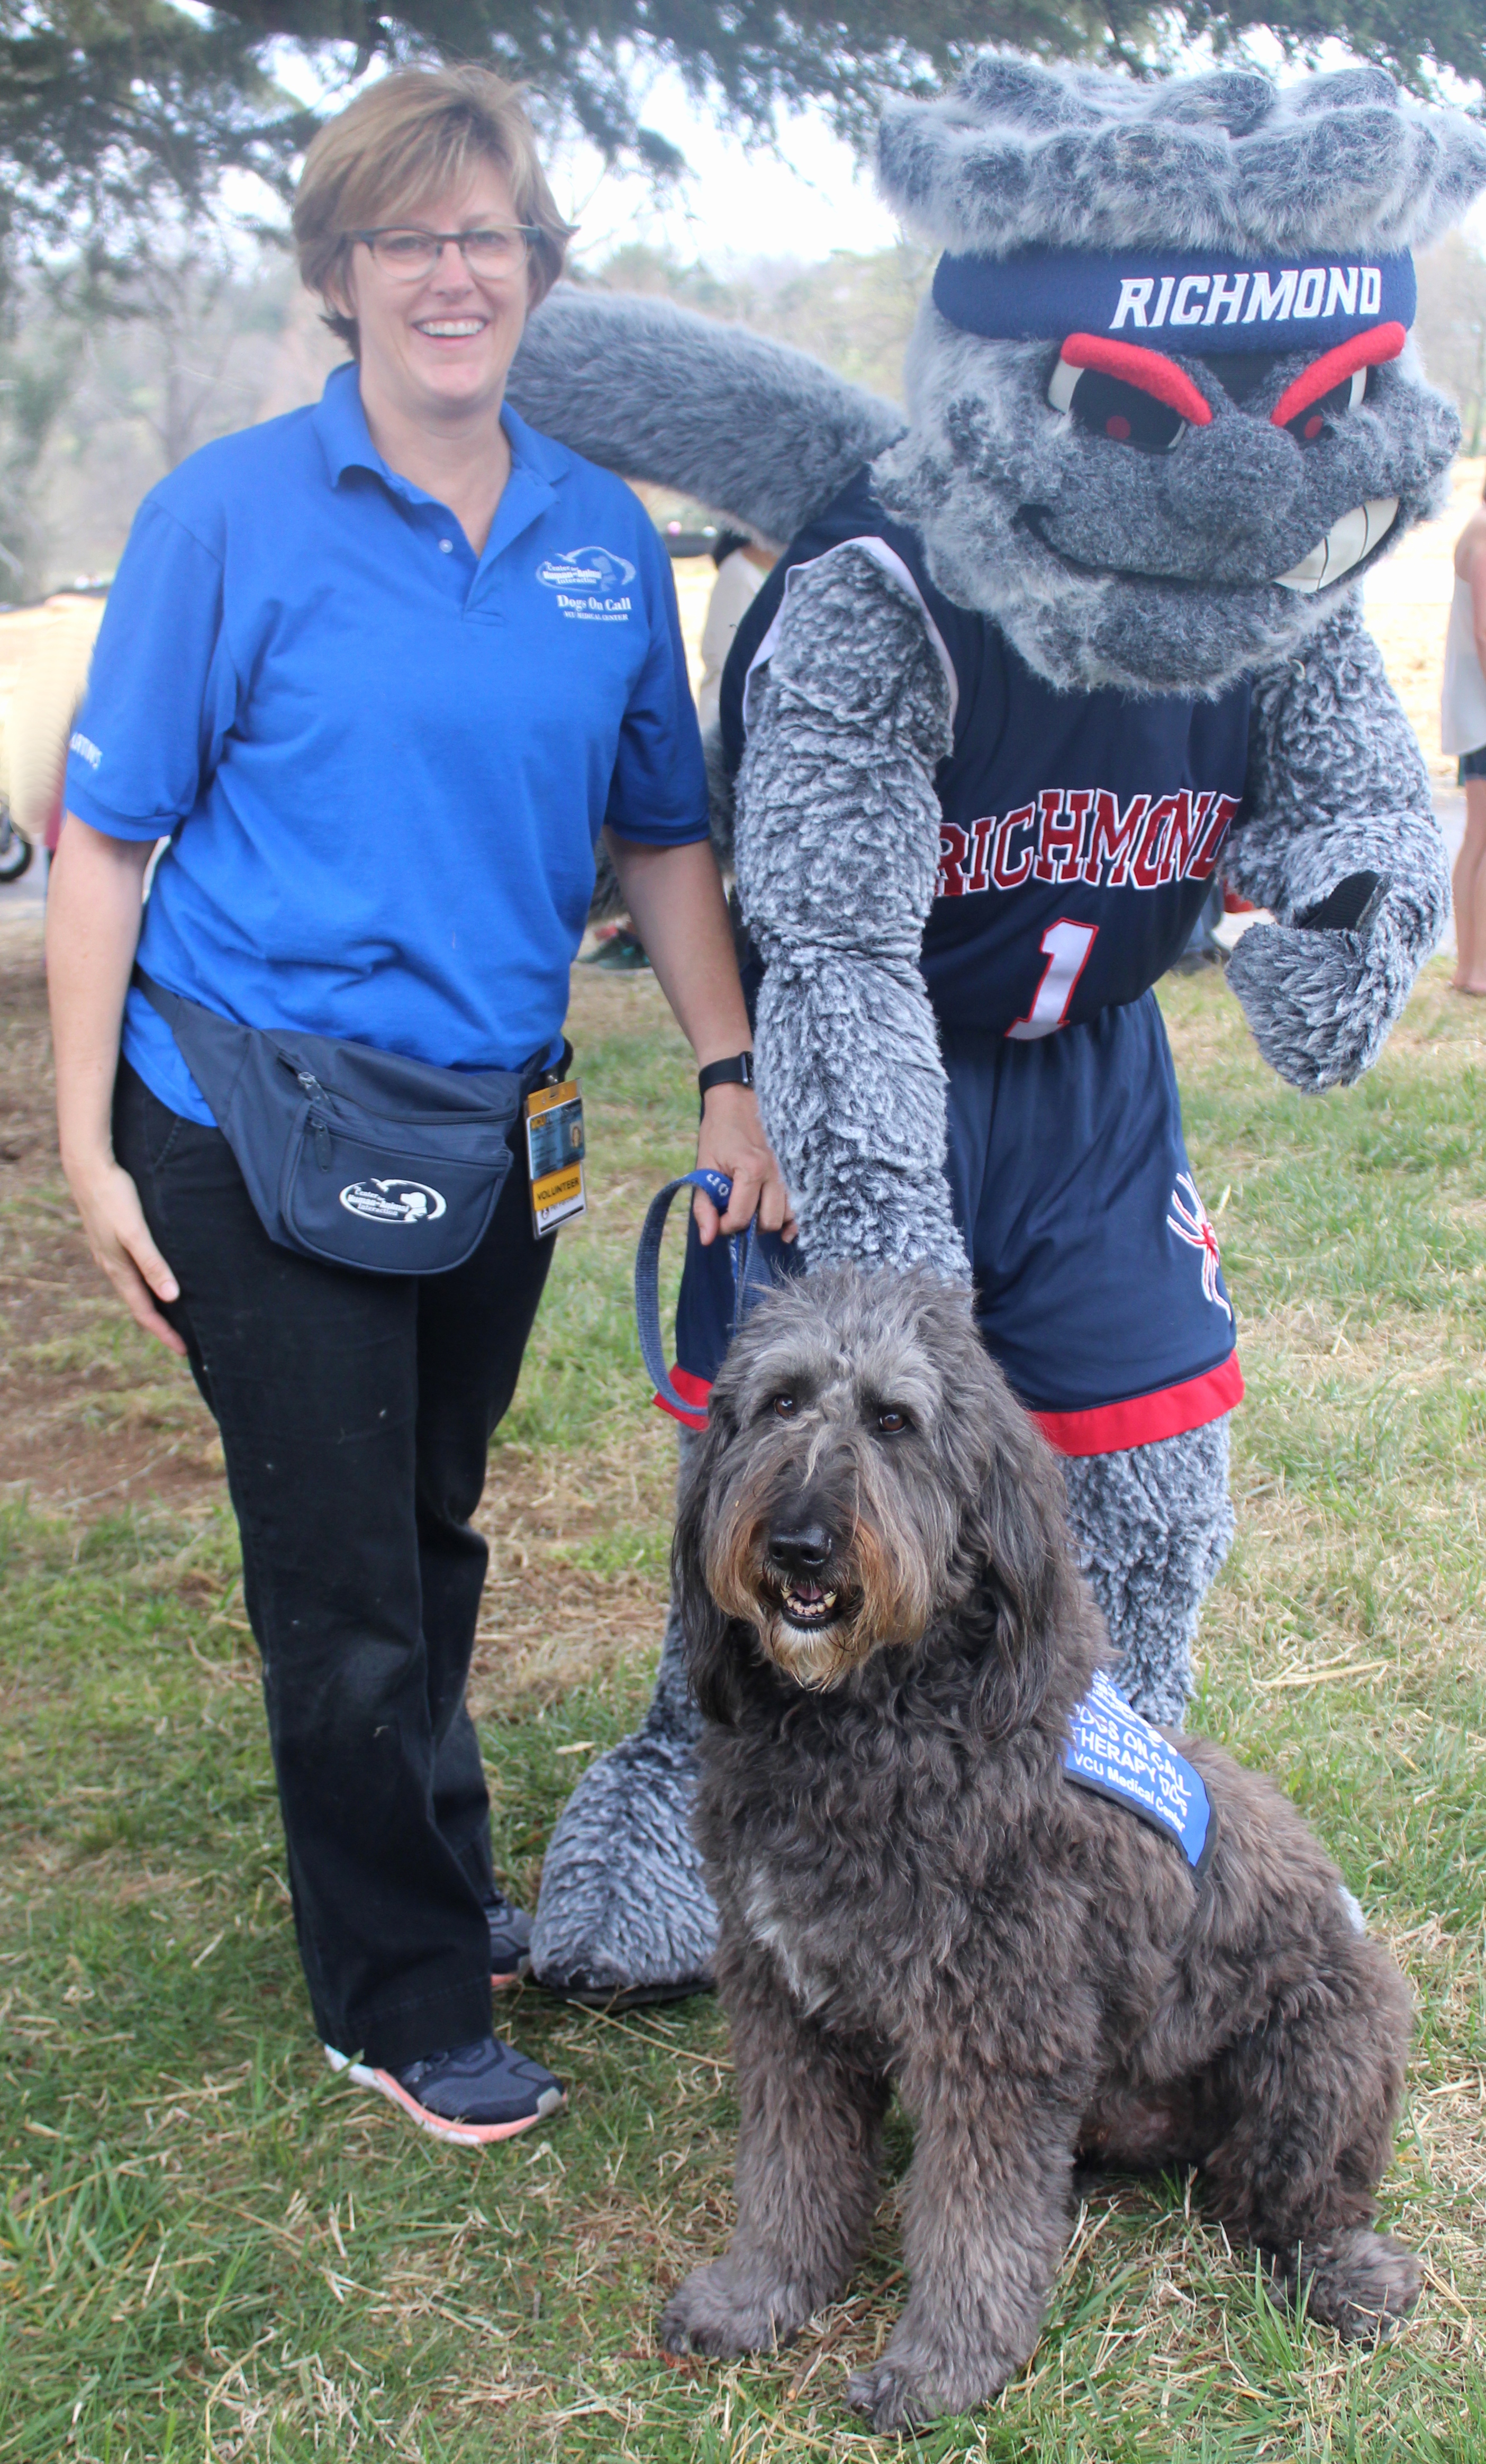 Dogs On Call therapy dog Clarke, a dark gray goldendoodle, stands in front of his handler and the University of Richmond's mascot, Webster.